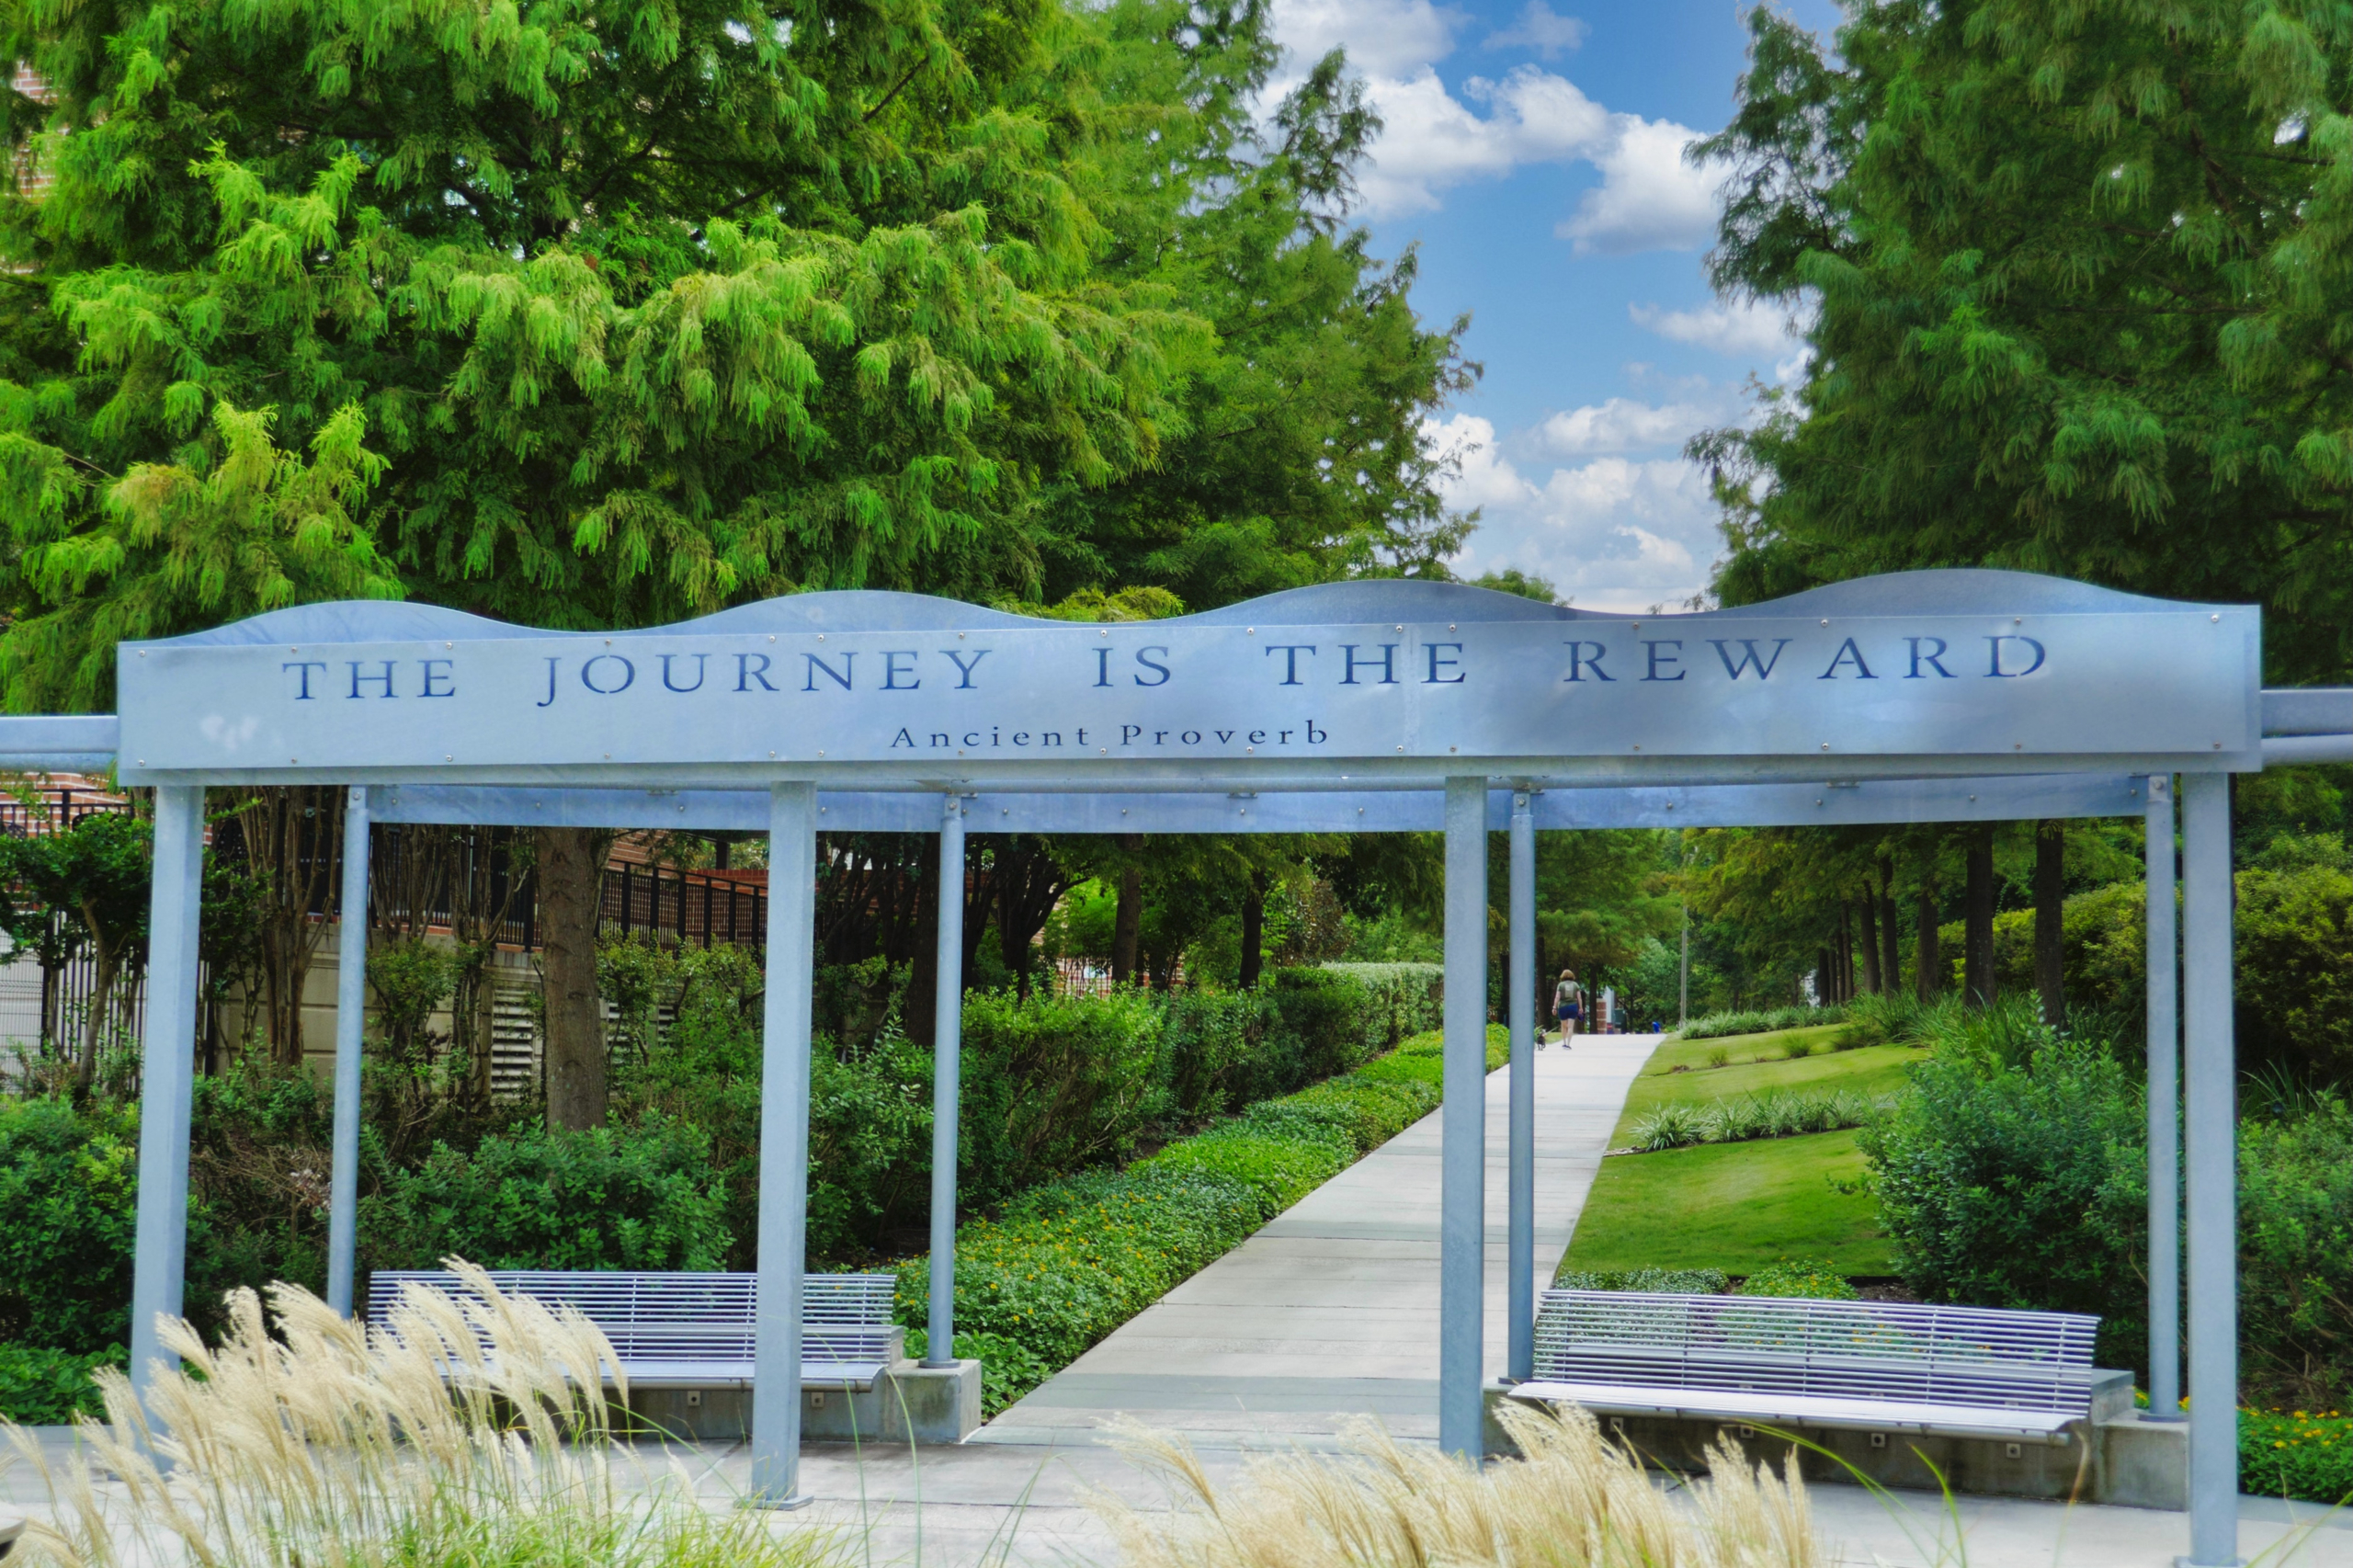 Two benches divided by a sidewalk are covered by a pergola with this ancient proverb written on the top board, "The Journey Is the Reward." Grasses sway in the foreground and green grass and trees line the sidewalk; the blue sky and puffy white clouds peek between the trees on either side of the walkway